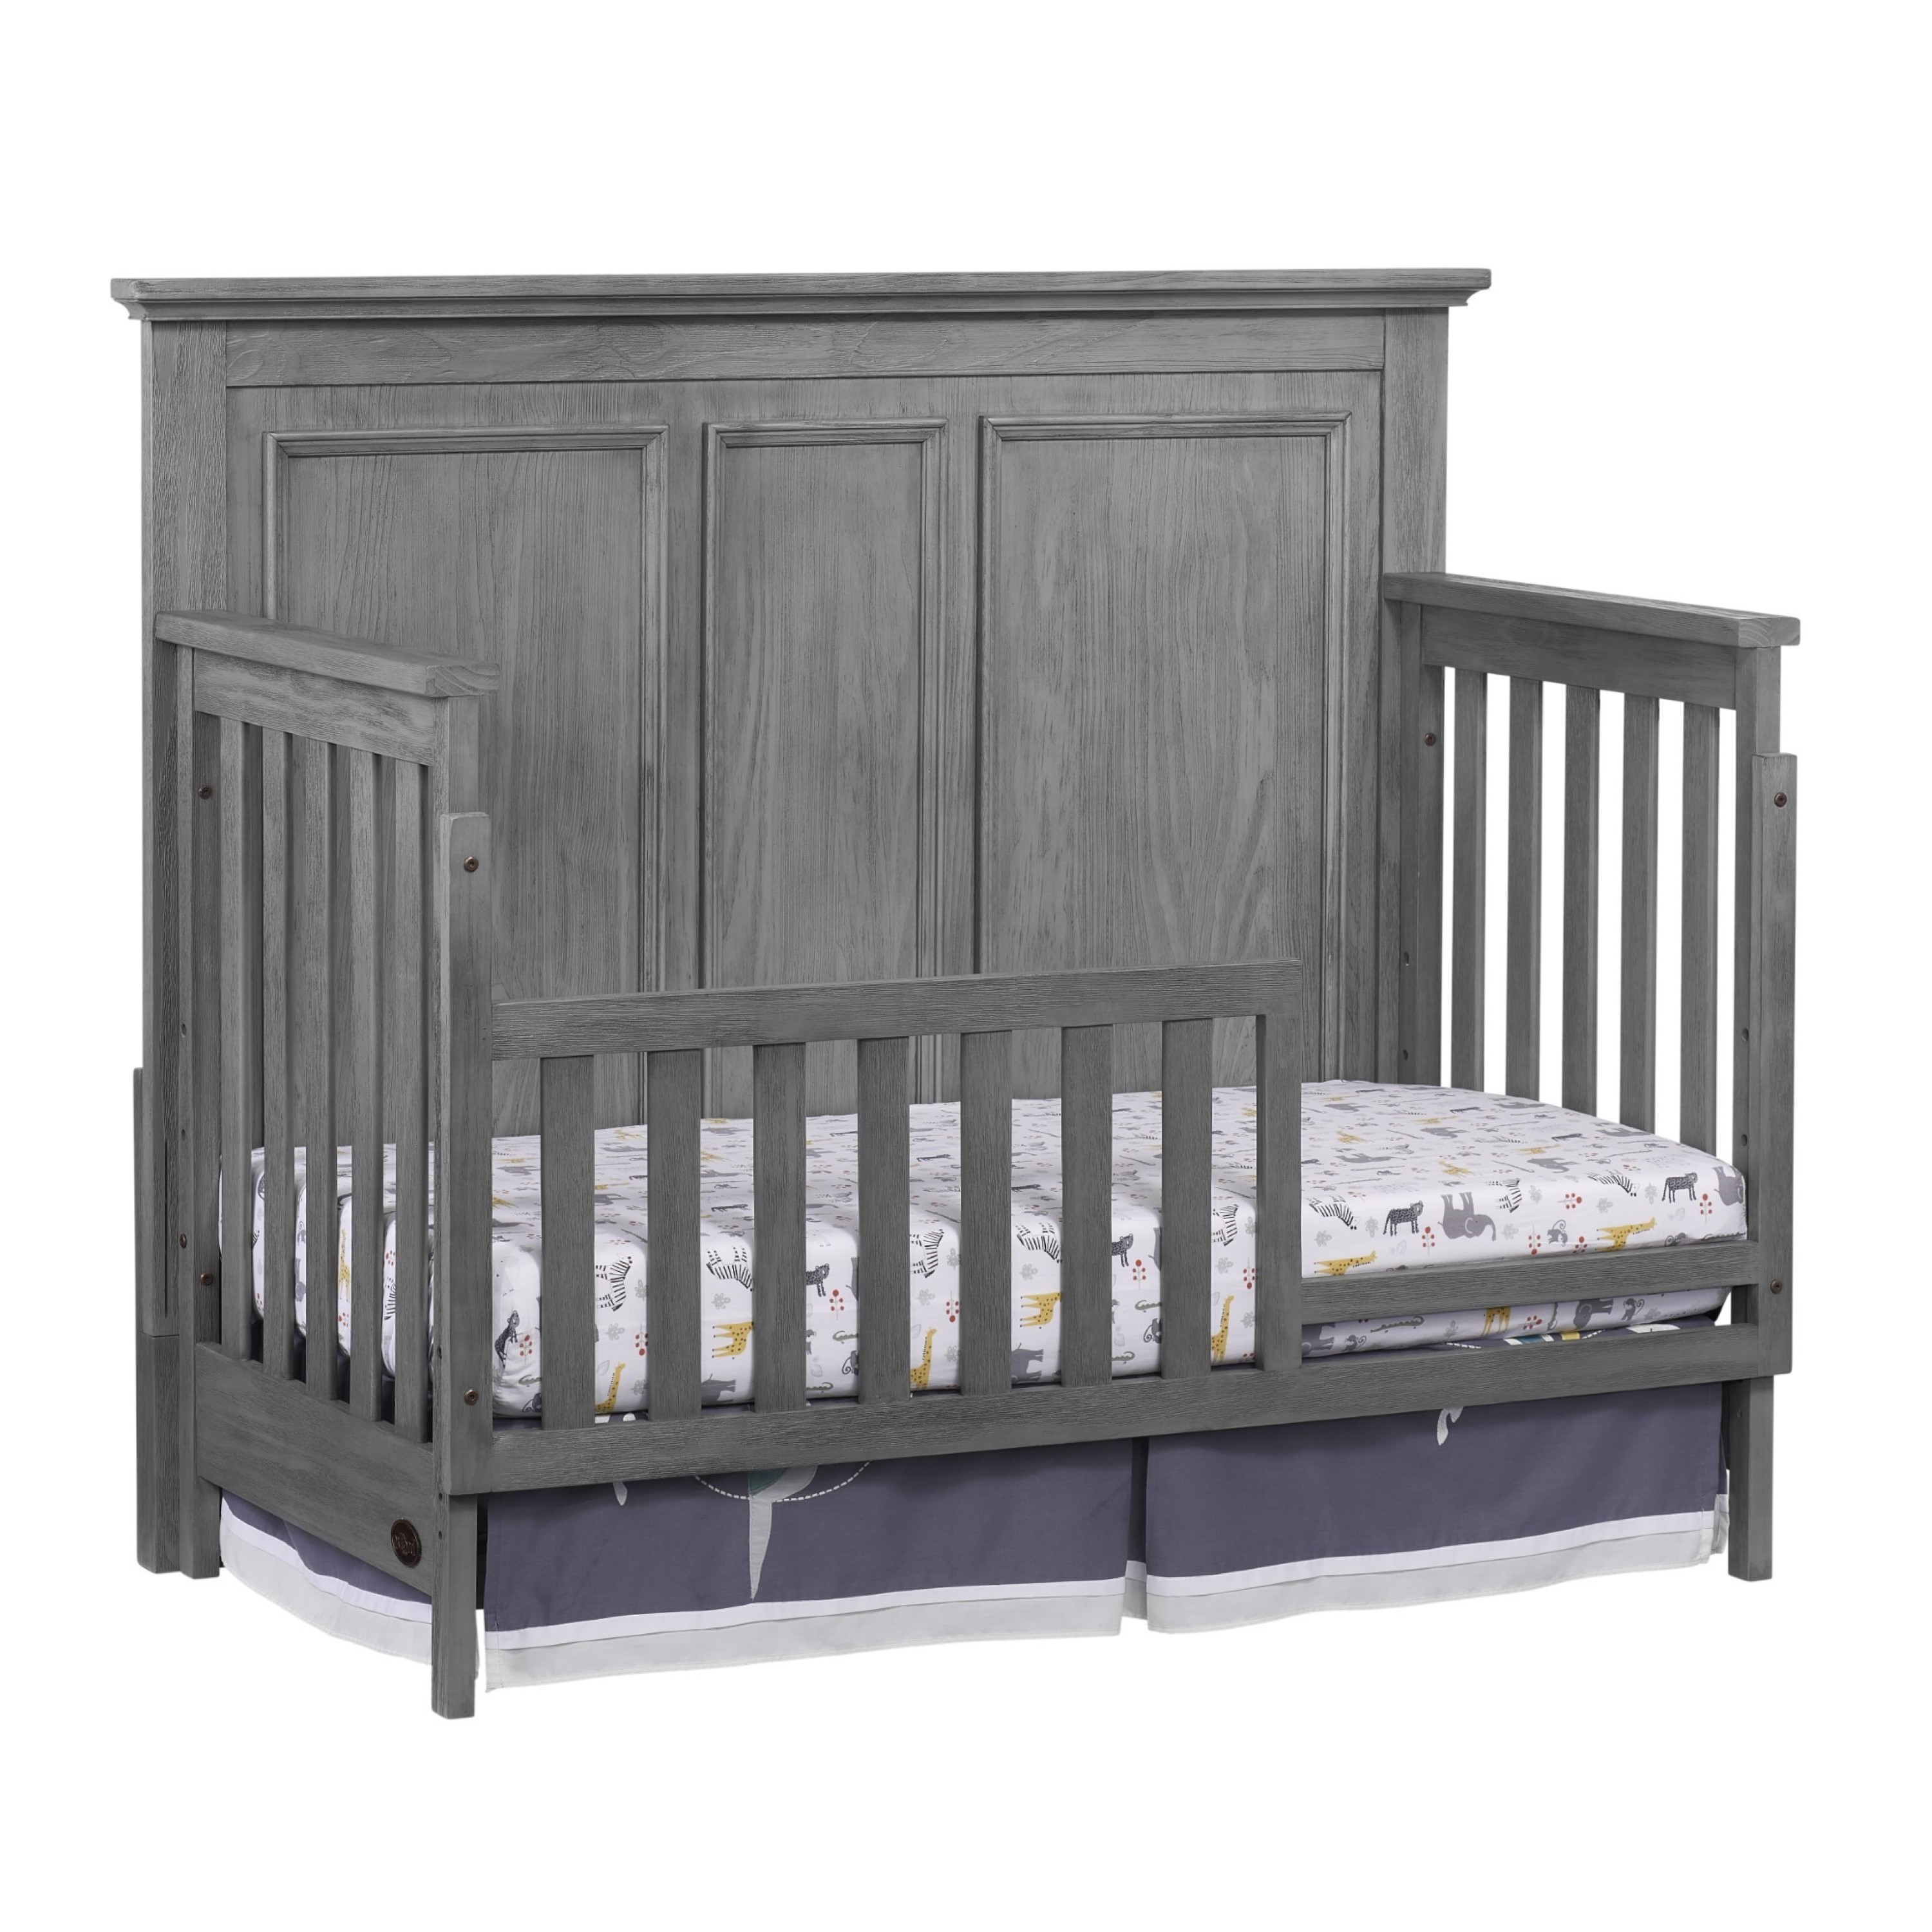 Oxford Baby Kenilworth 4-in-1 Convertible Crib, Graphite Gray, GREENGUARD Gold Certified, Wooden Crib - image 3 of 10